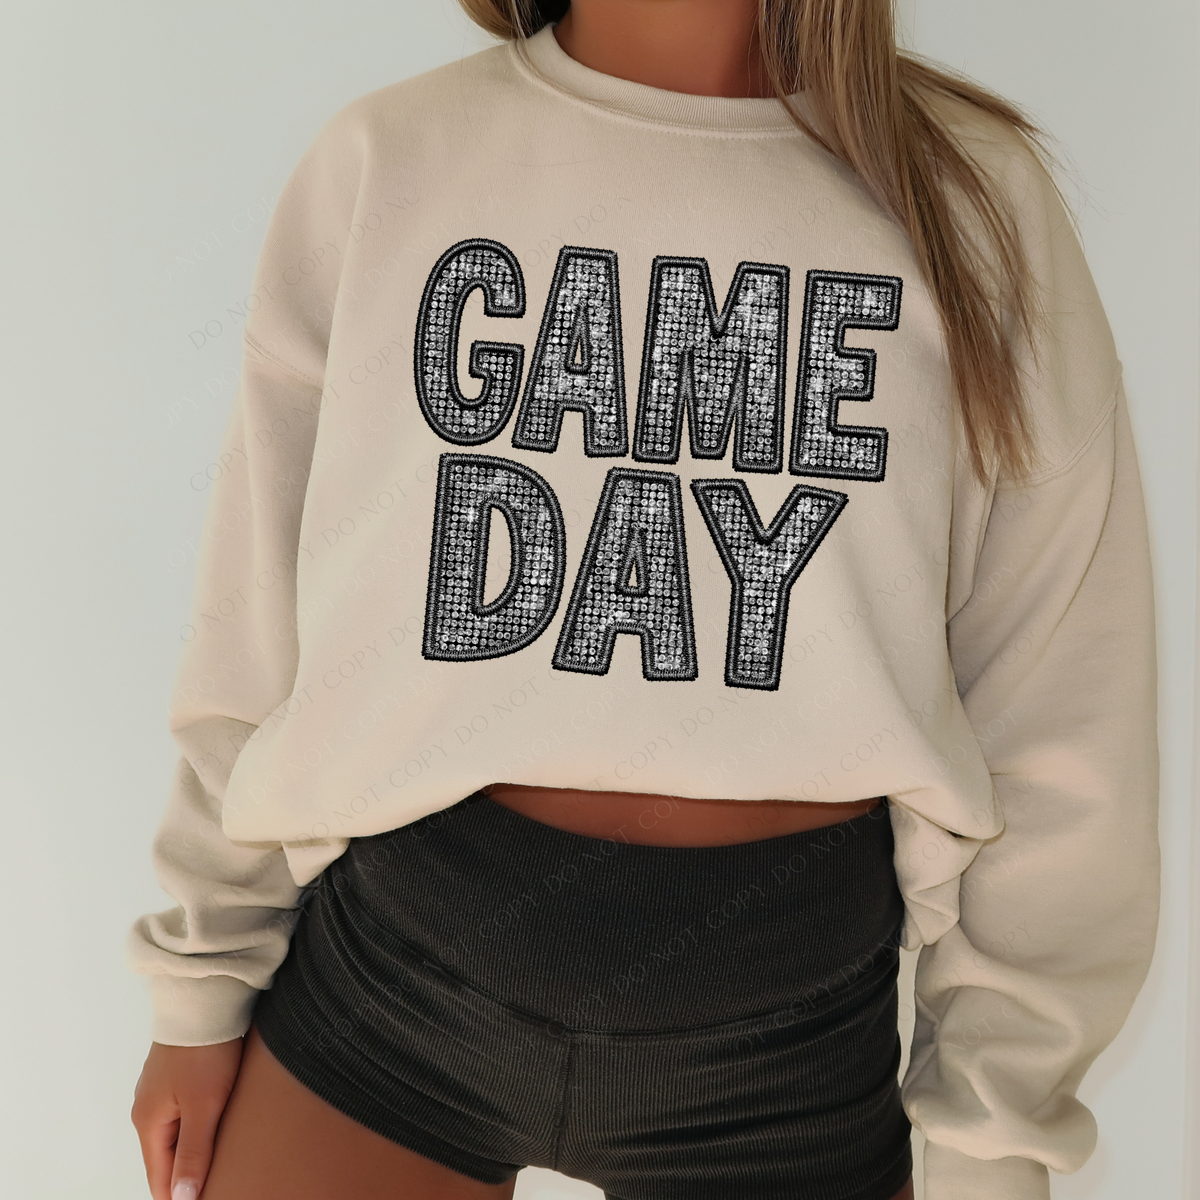 Game Day Faux Embroidery Diamonds Bling in Black Digital Design, PNG